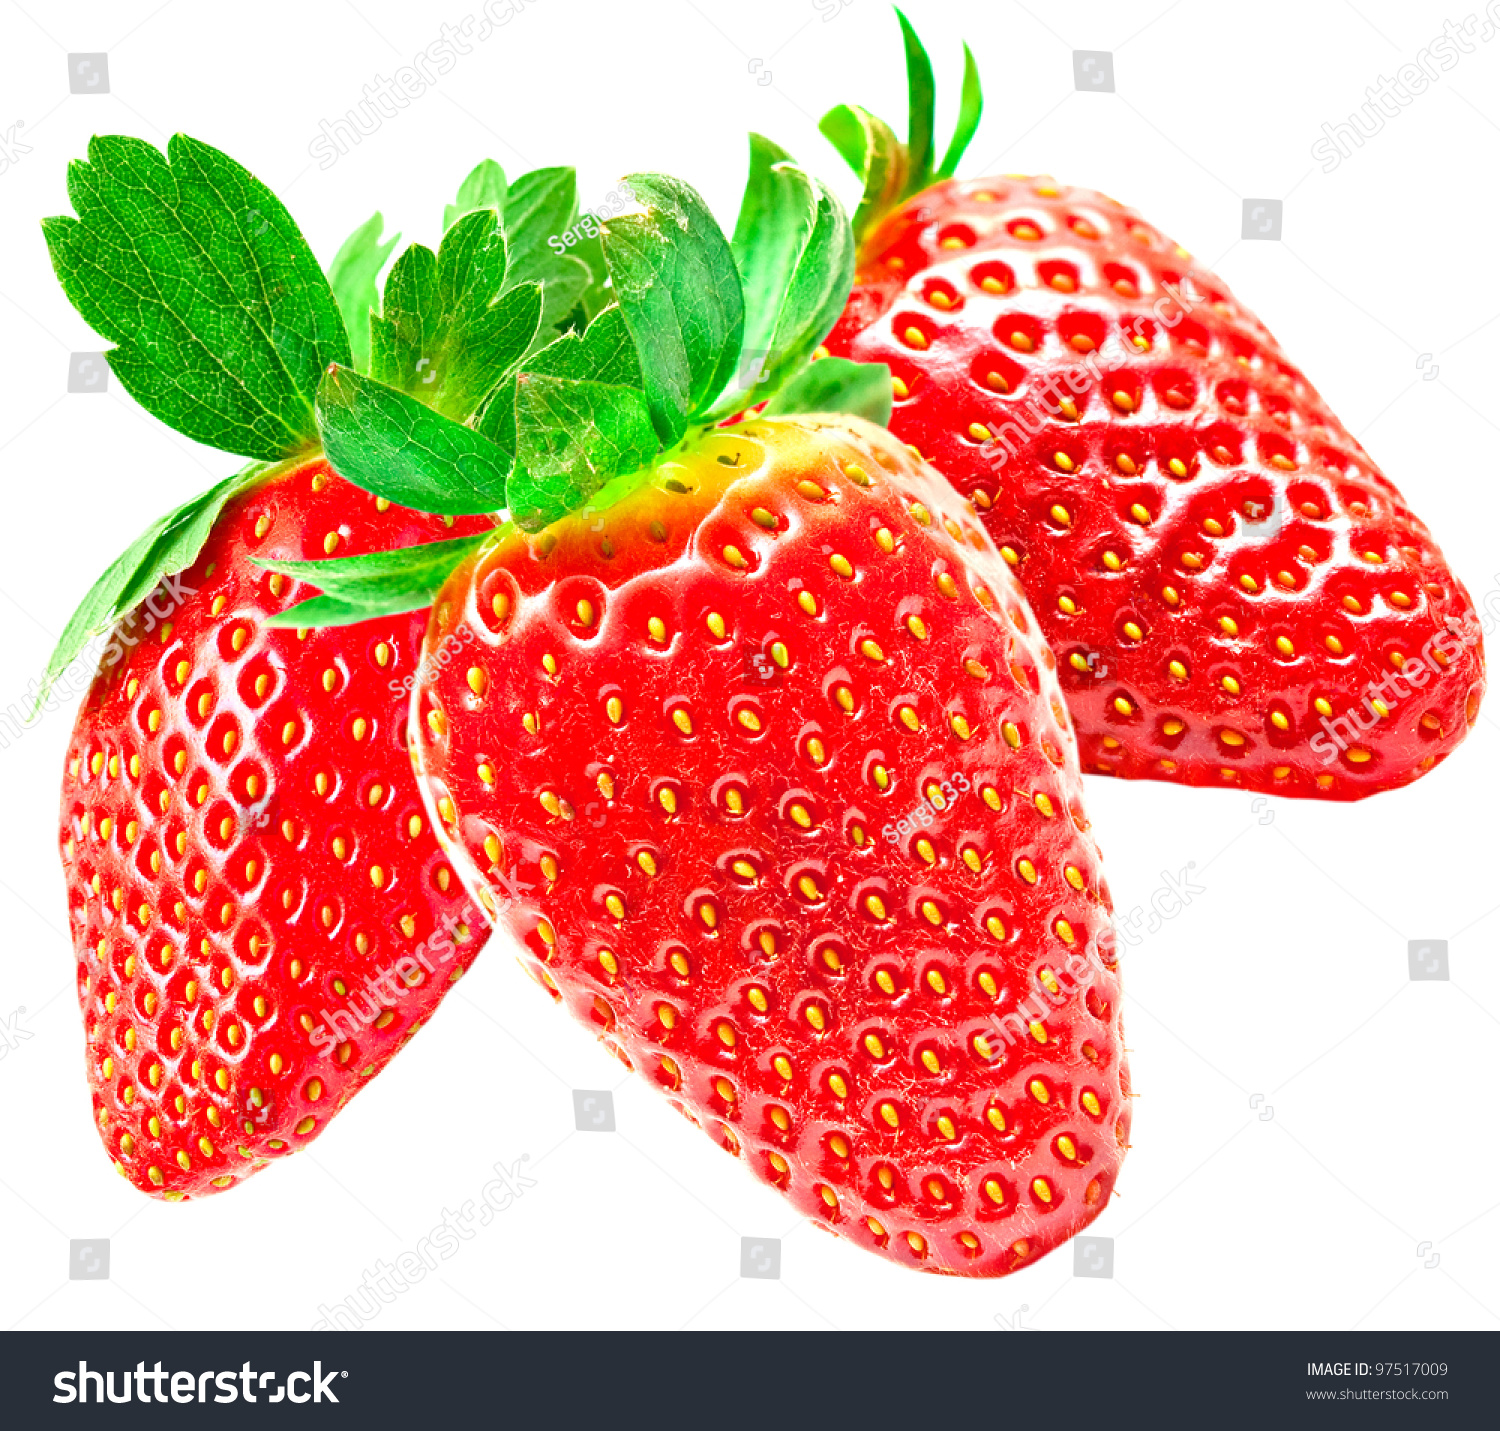 Strawberry Isolated On White Background Stock Photo 97517009 - Shutterstock